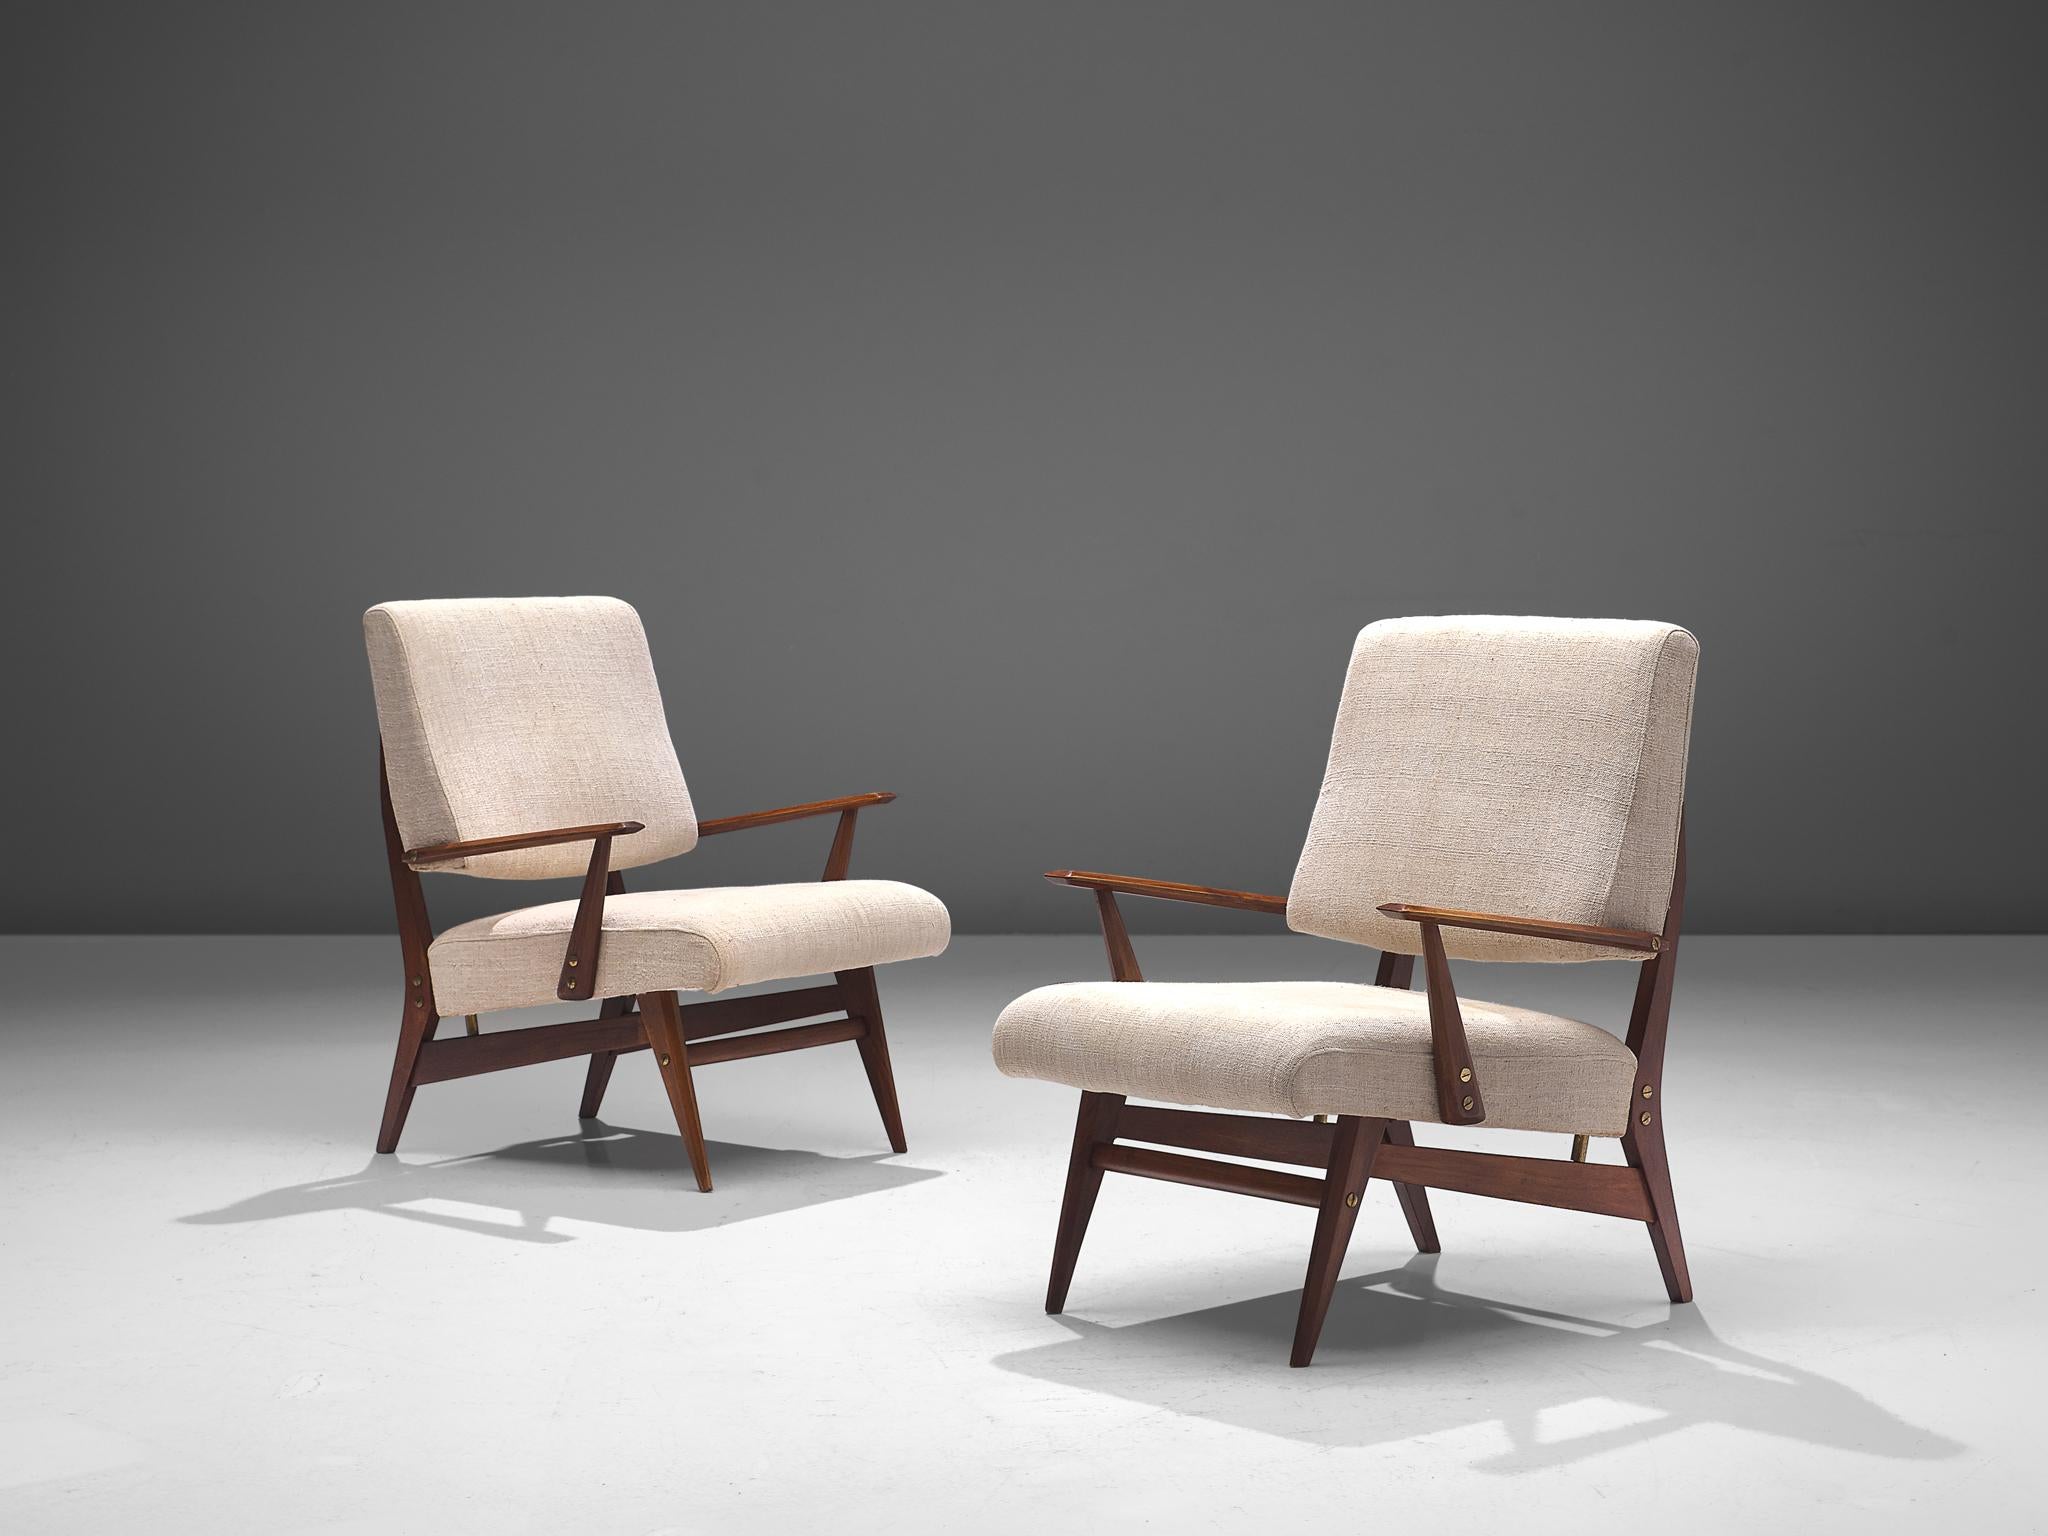 Easy chairs, in eggshell white fabric, walnut and brass, Italy, 1960s.

These mid-modern armchairs are executed in a neutral, off-white fabric. The comfortable easy chairs show voluptuous, round lines. The most iconic feature of this set is the